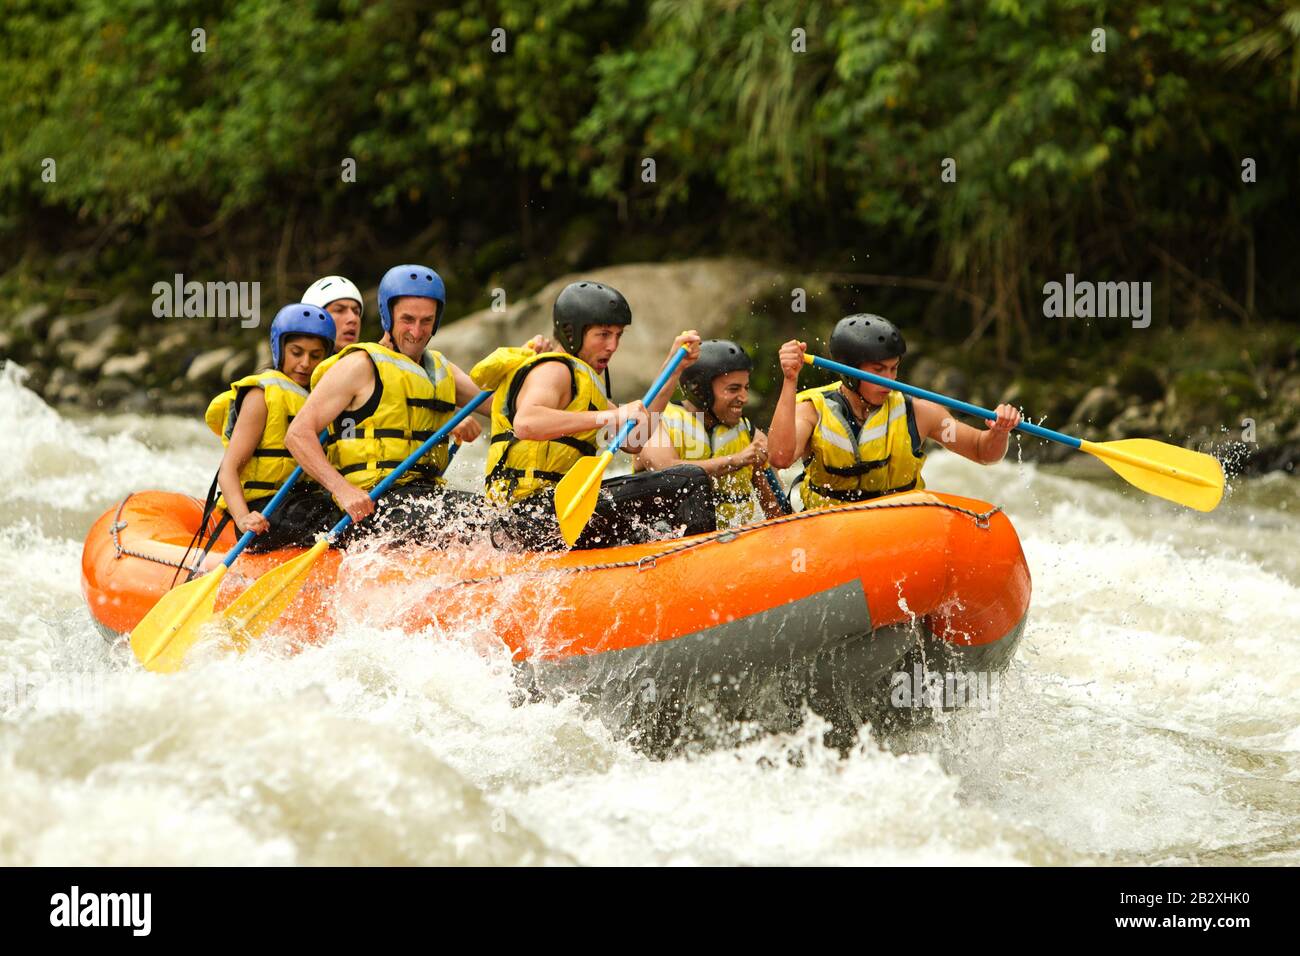 Union Of Mixed Pioneer Men And Lady With Guided By Specialist Pilot On Whitewater River Rafting In Ecuador Stock Photo